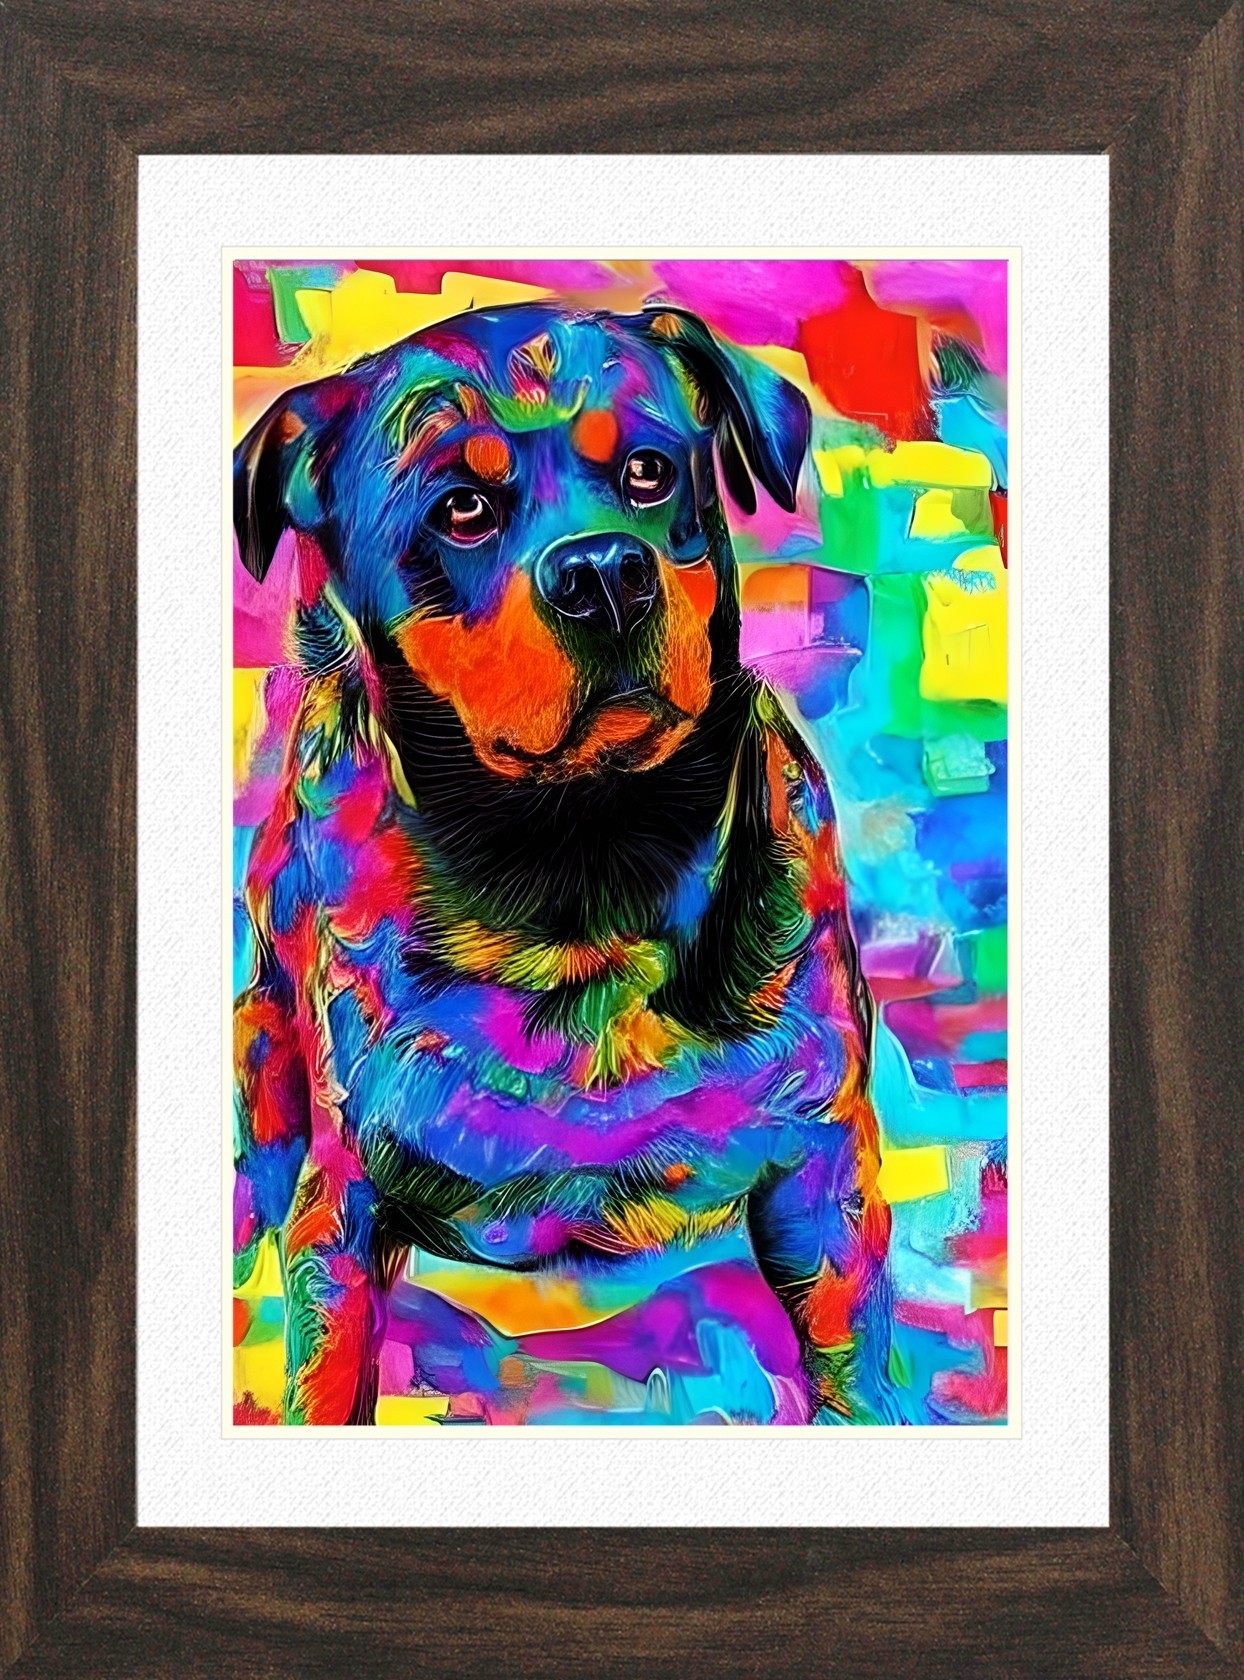 Rottweiler Dog Picture Framed Colourful Abstract Art (30cm x 25cm Walnut Frame)